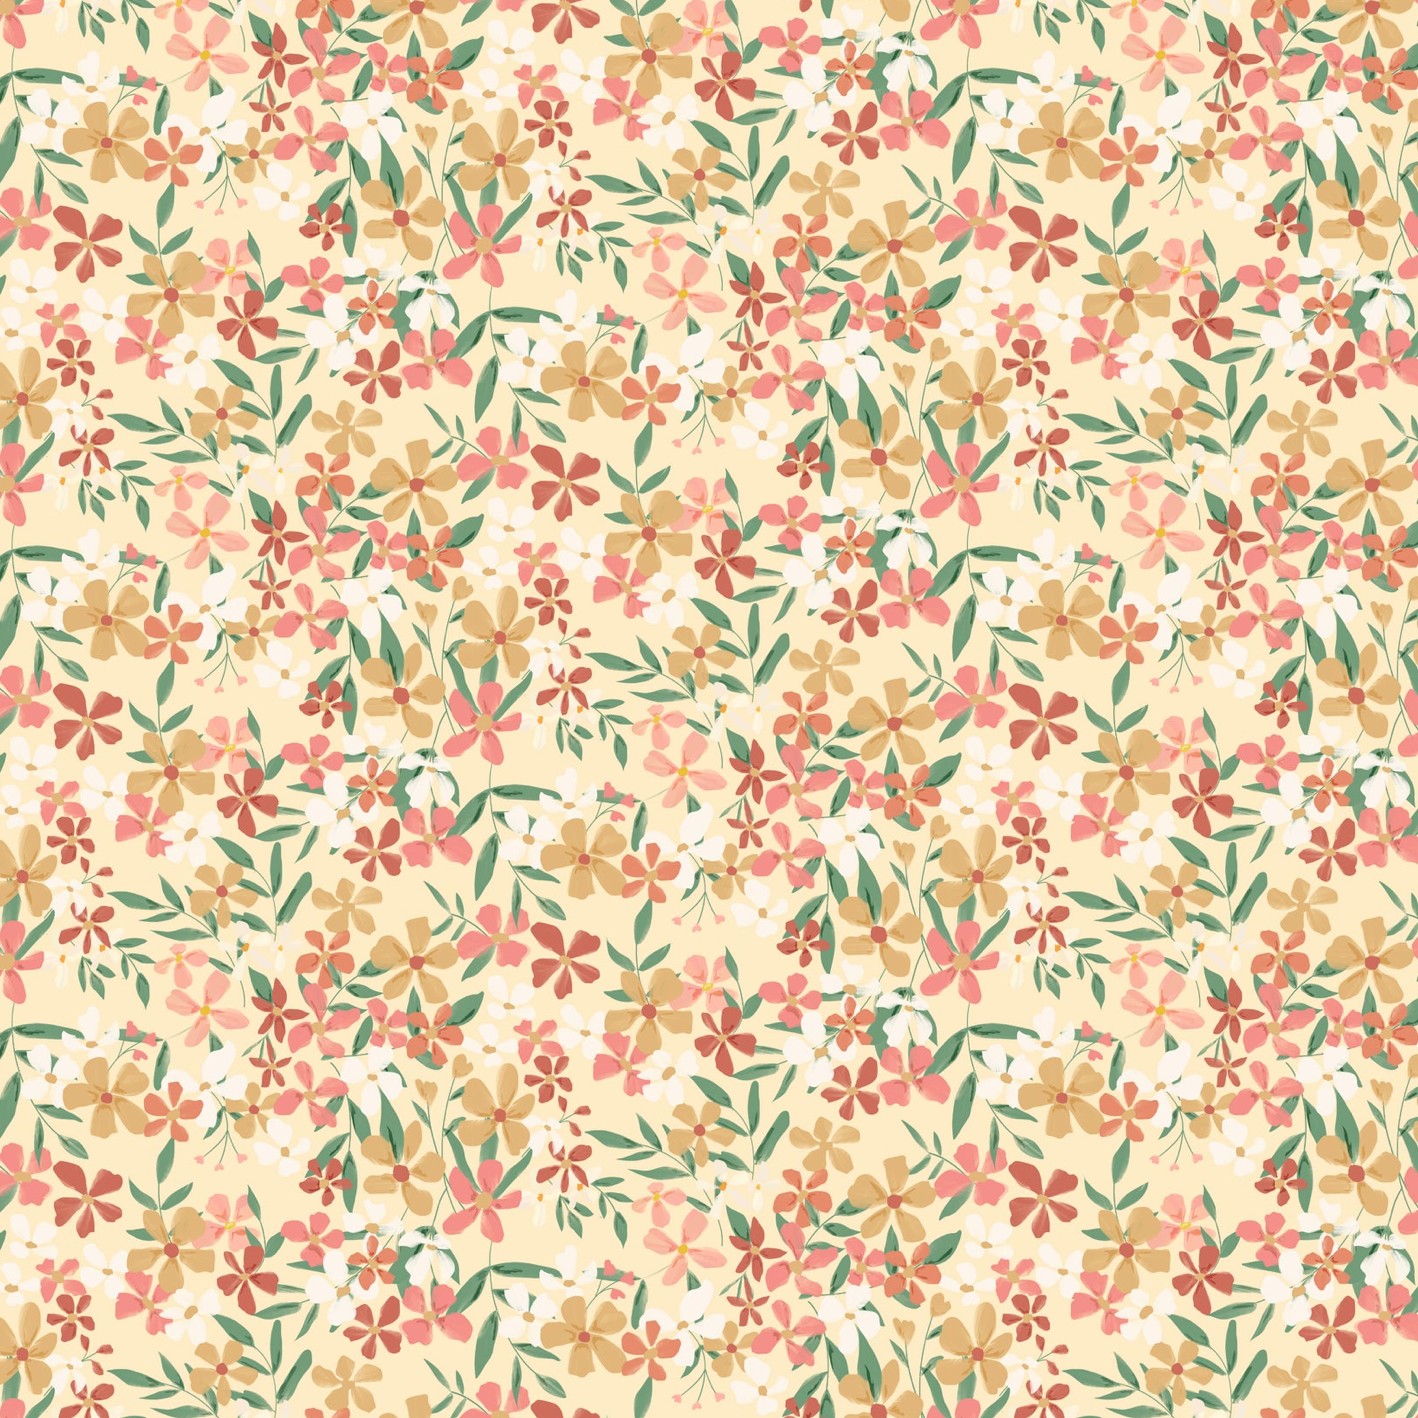 Painted Blossoms Painted Blossoms Yellow PB24653, sold by the 1/2 yard, *PREORDER